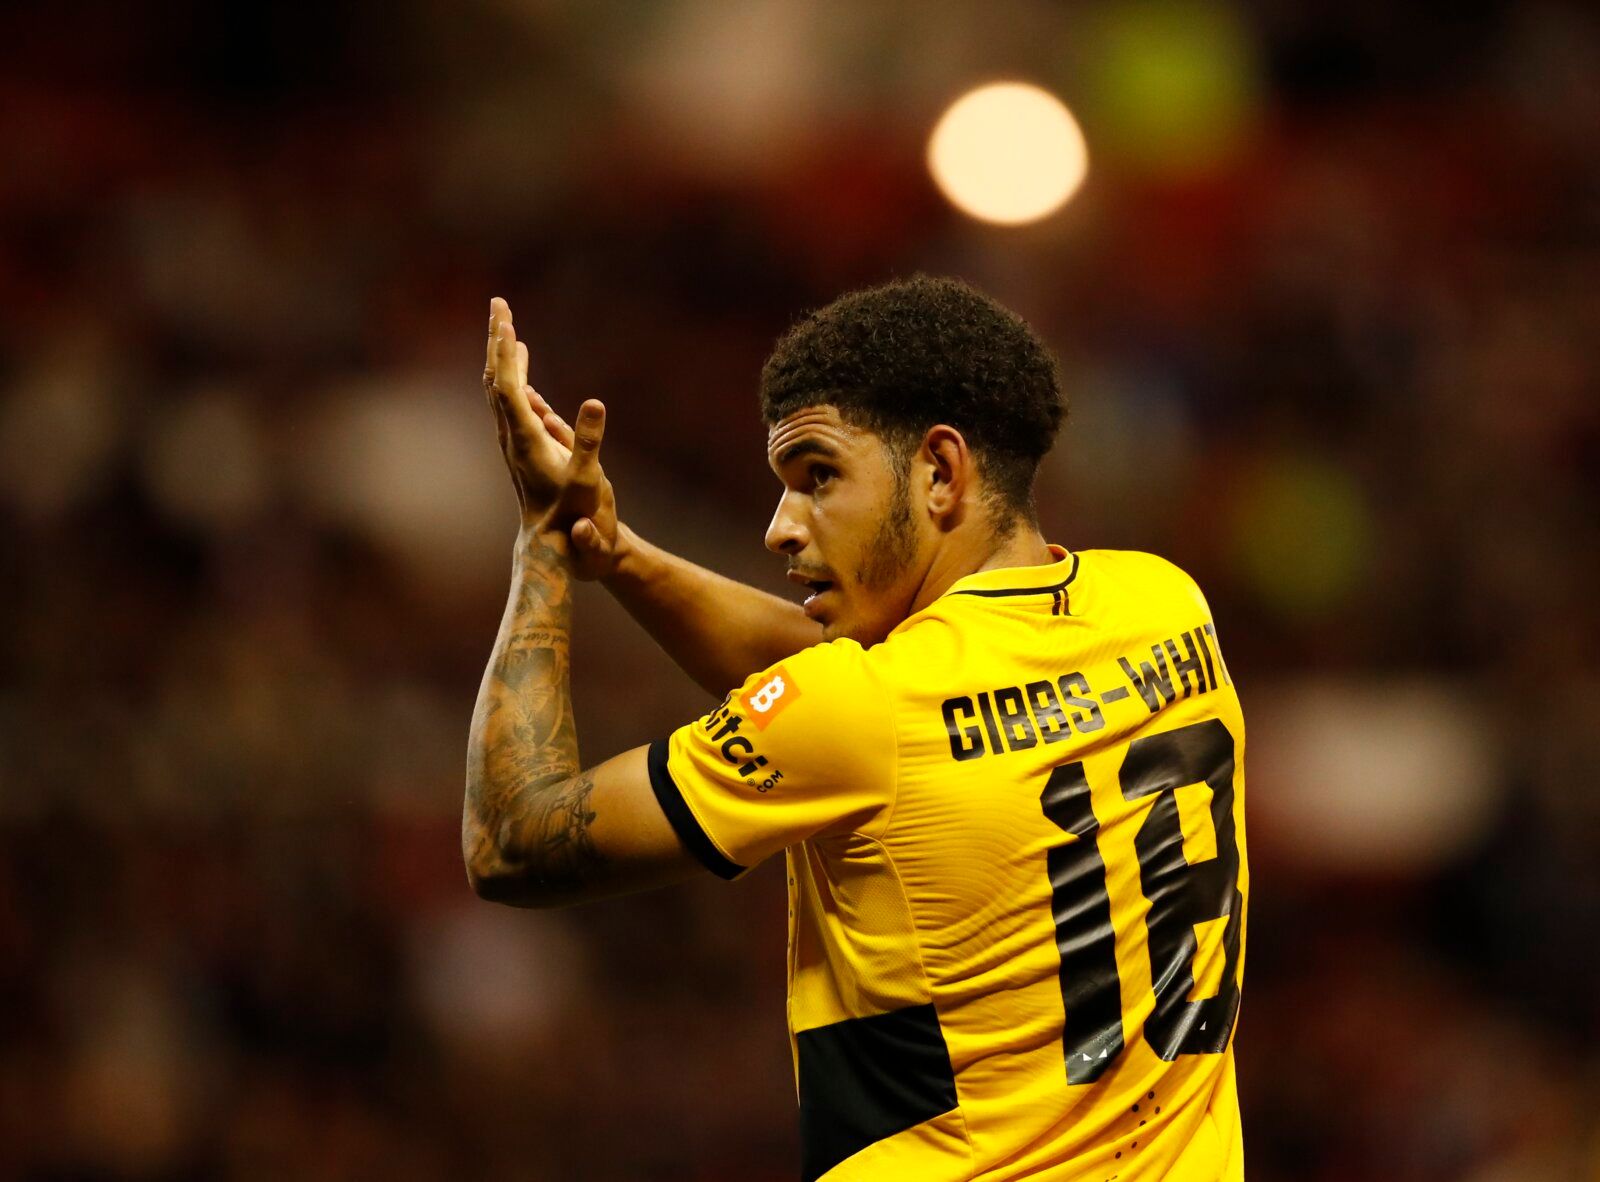 Soccer - England - Carabao Cup Second Round - Nottingham Forest v Wolverhampton Wanderers - The City Ground, Nottingham, Britain - August 24, 2021 Wolverhampton Wanderers' Morgan Gibbs-White celebrates scoring their fourth goal Action Images via Reuters/Andrew Boyers